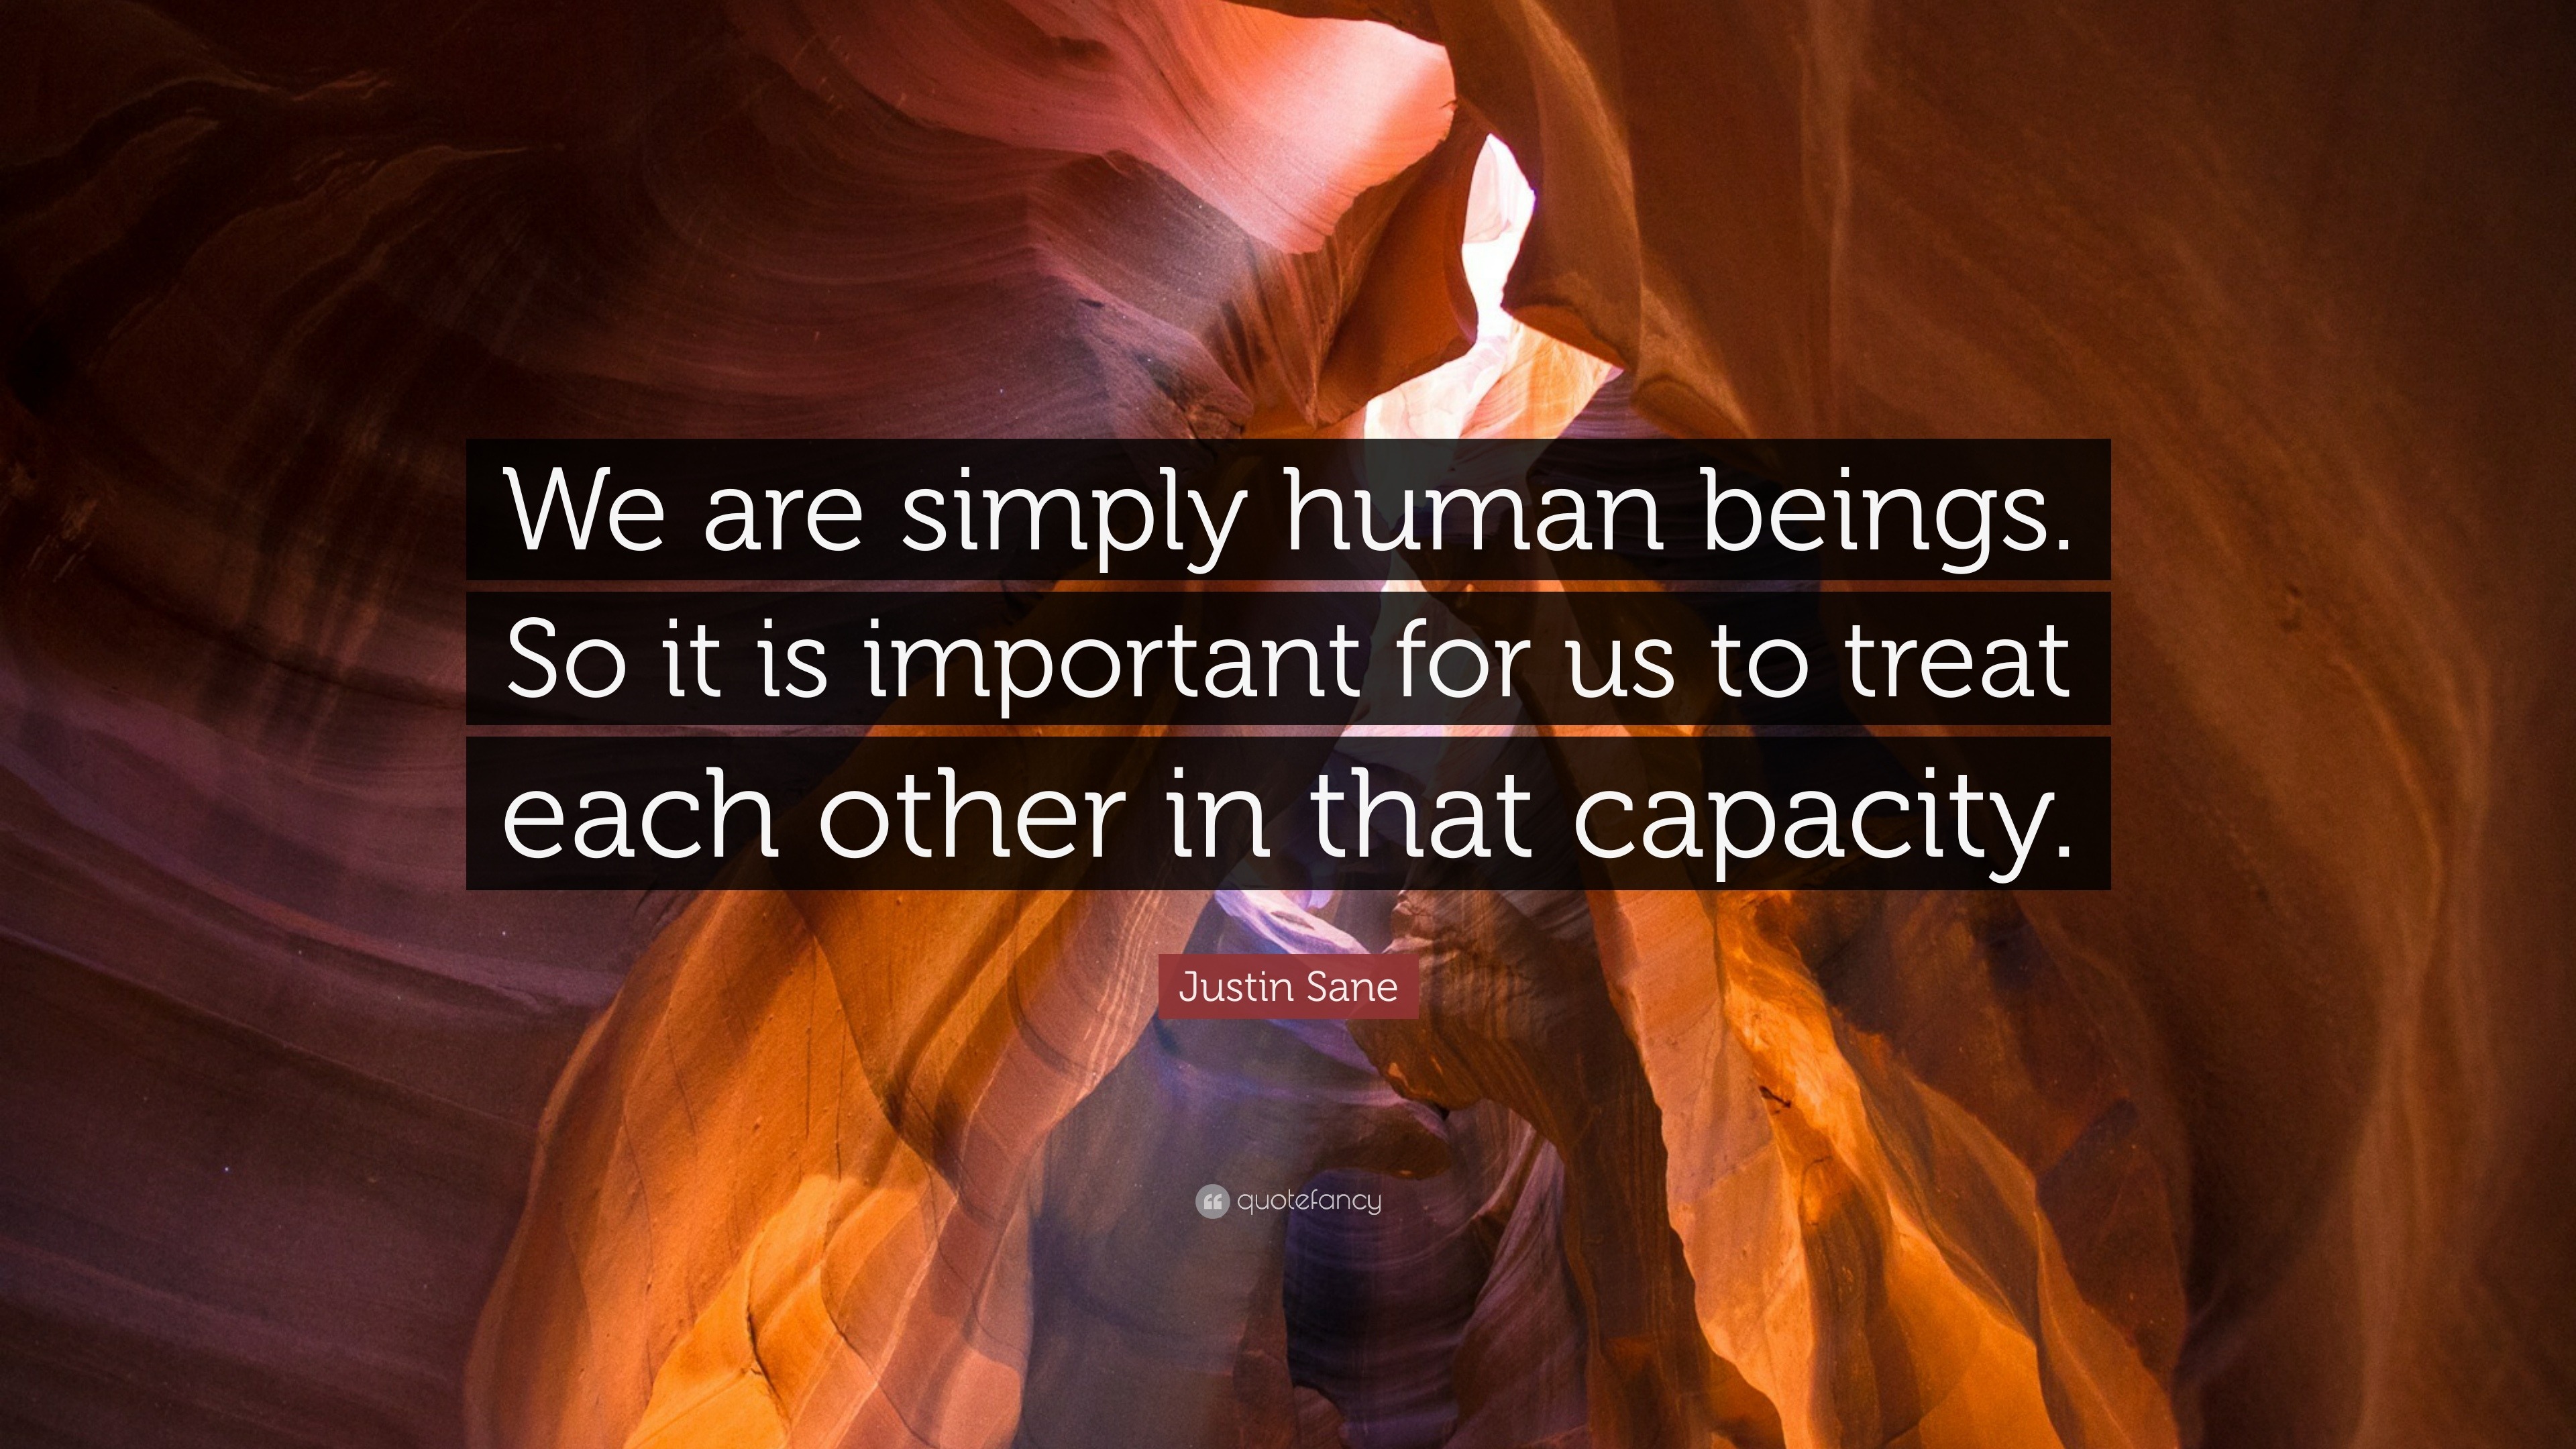 https://quotefancy.com/media/wallpaper/3840x2160/1494734-Justin-Sane-Quote-We-are-simply-human-beings-So-it-is-important.jpg